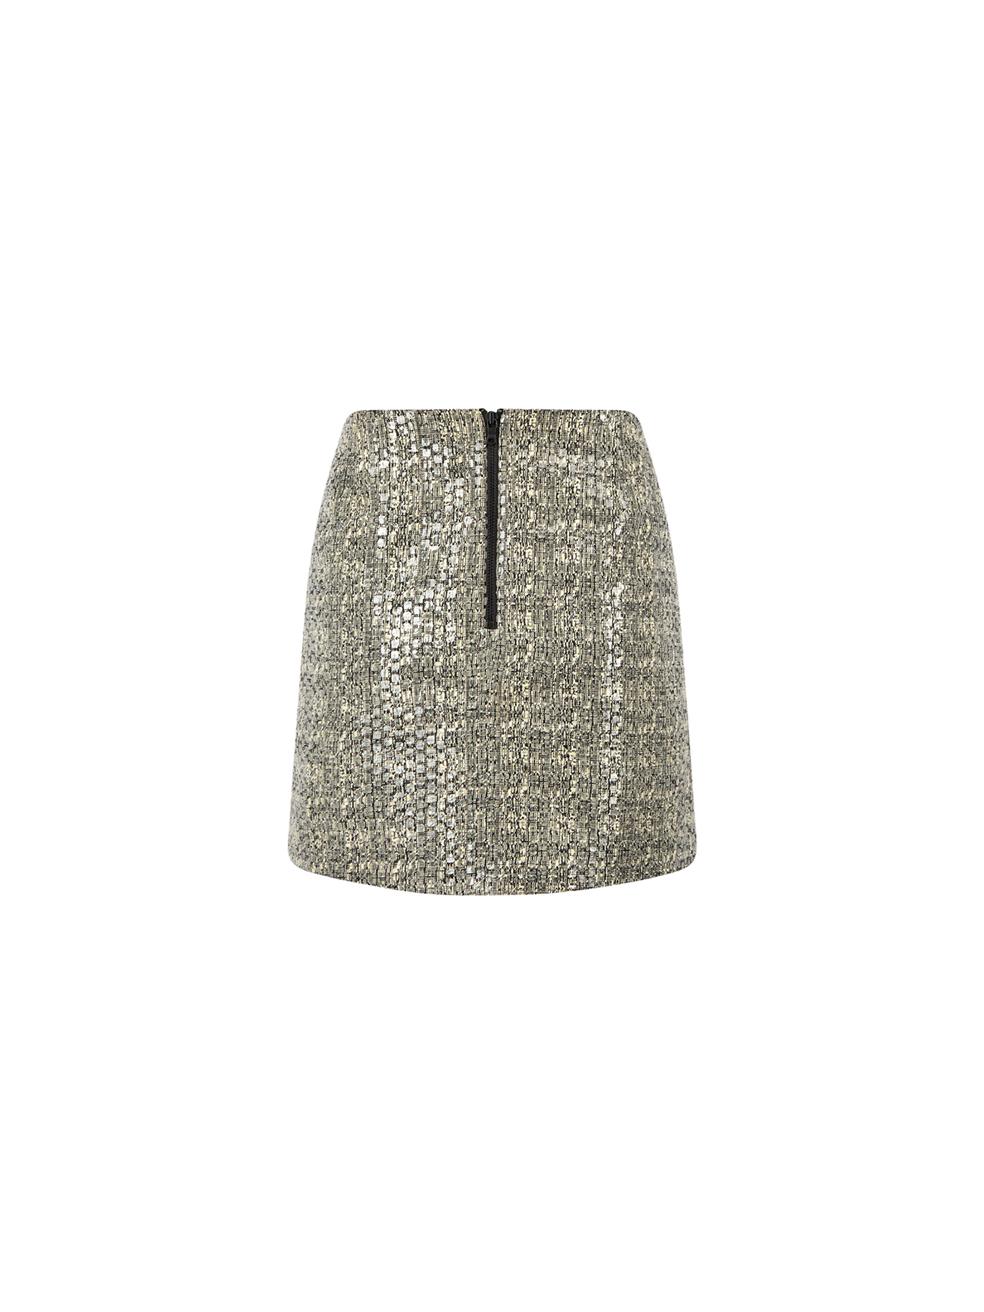 Alice + Olivia Grey Textured Micro Mini Skirt Size L In Good Condition For Sale In London, GB